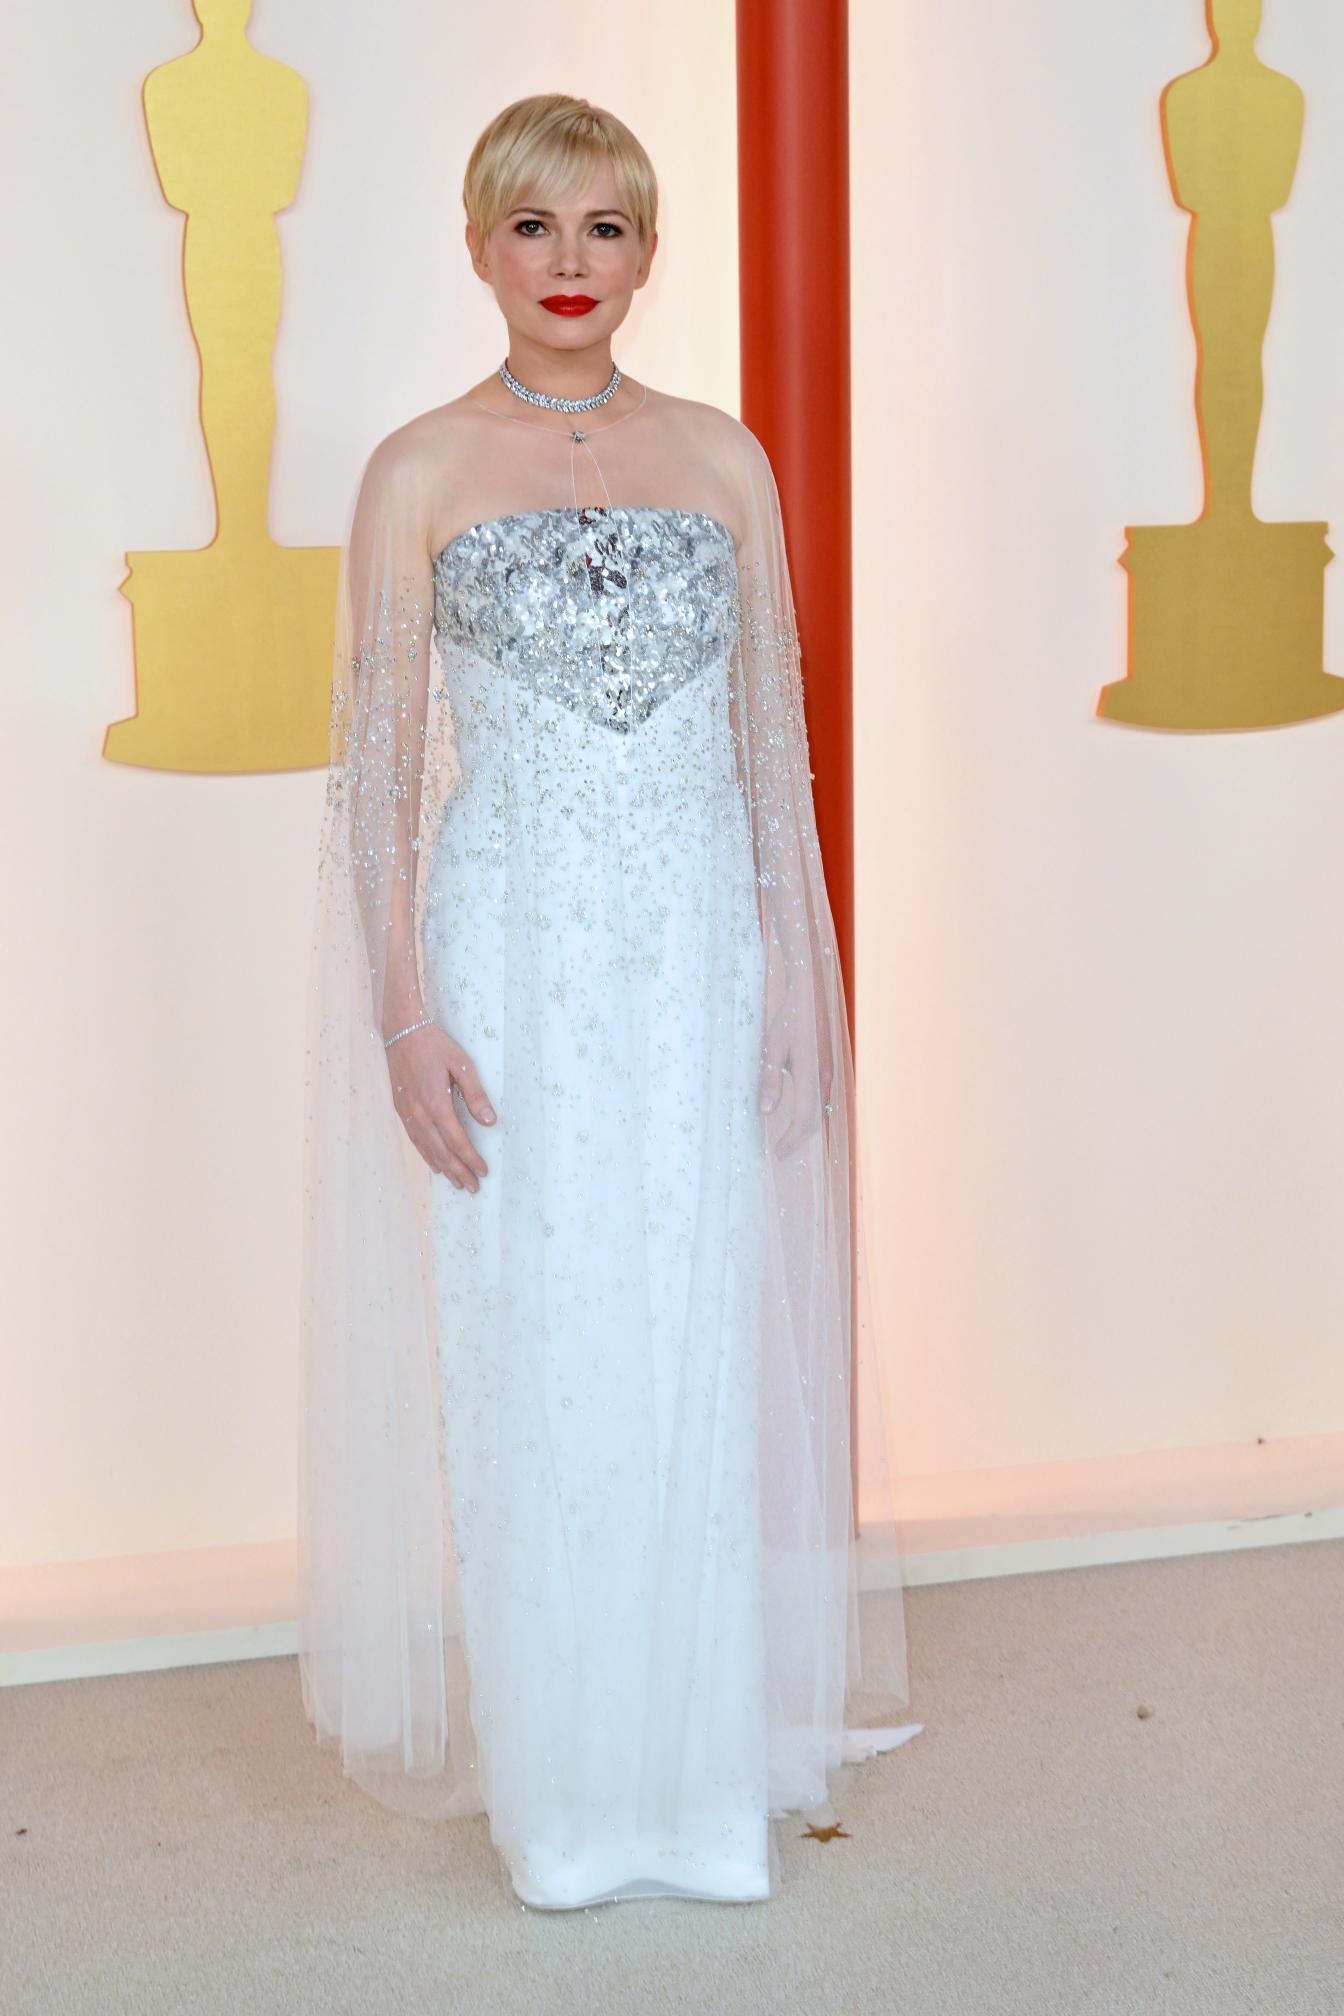 US actress Michelle Williams attends the 95th Annual Academy Awards at the Dolby Theatre in Hollywood